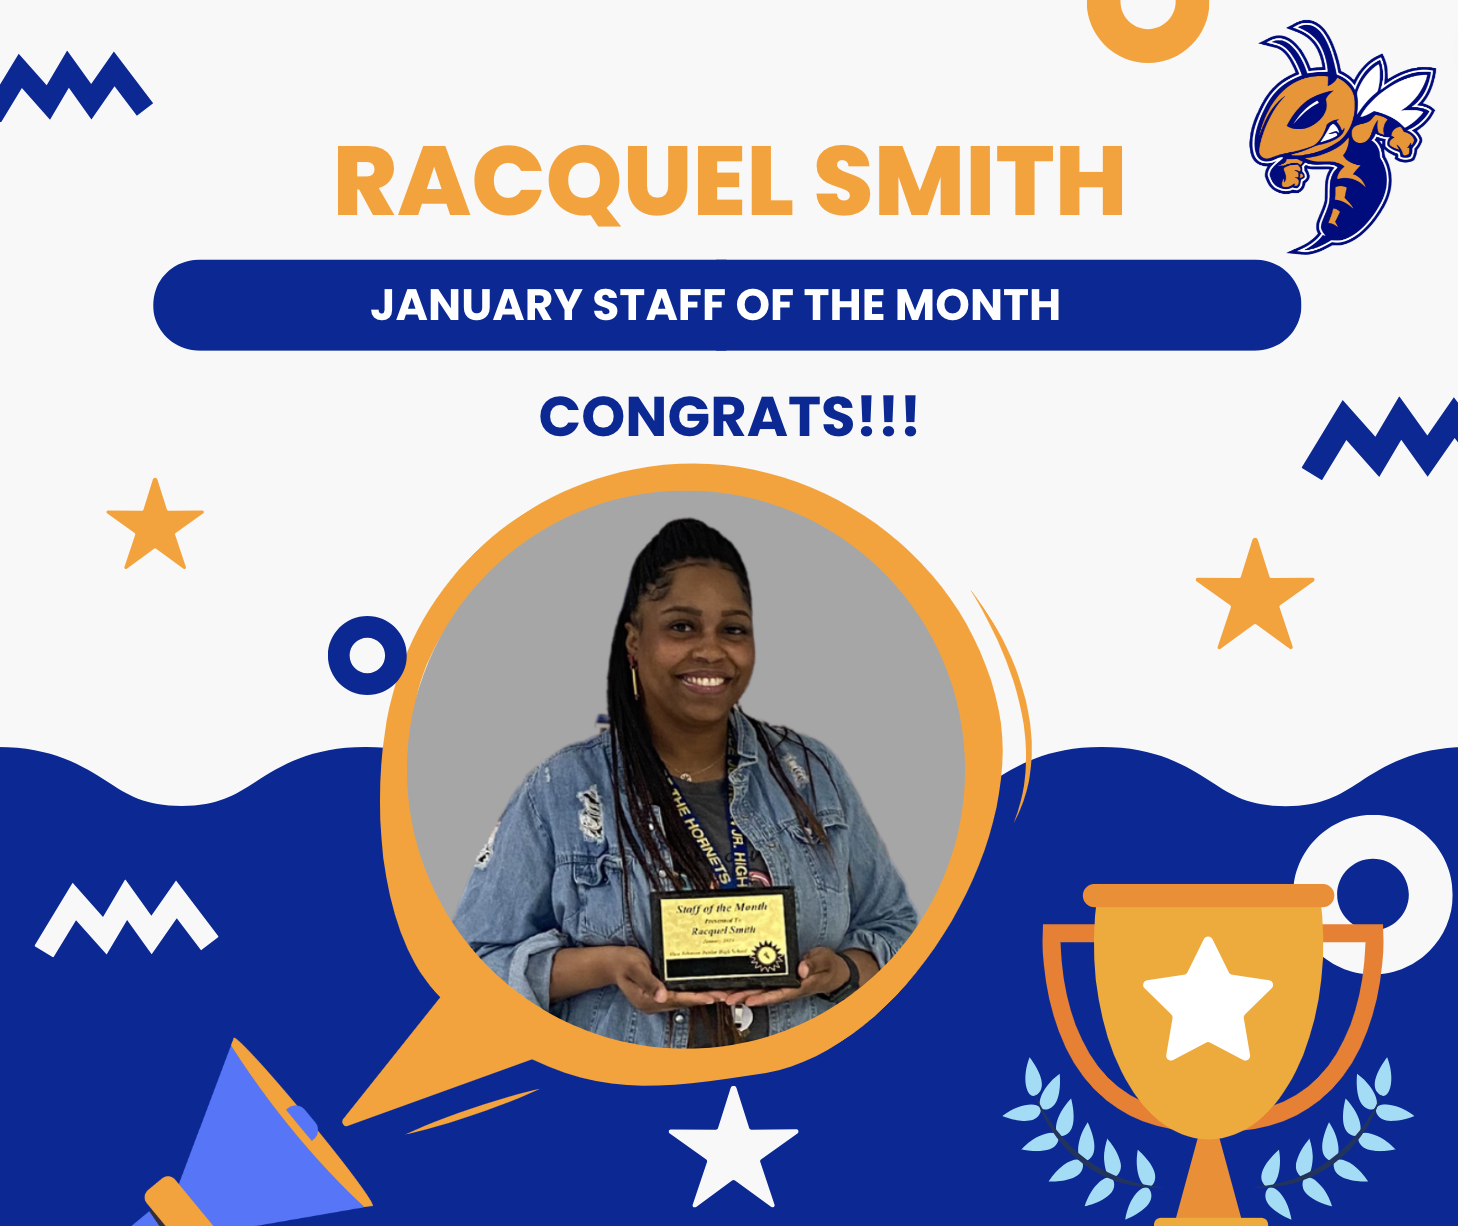 January Staff of the Month